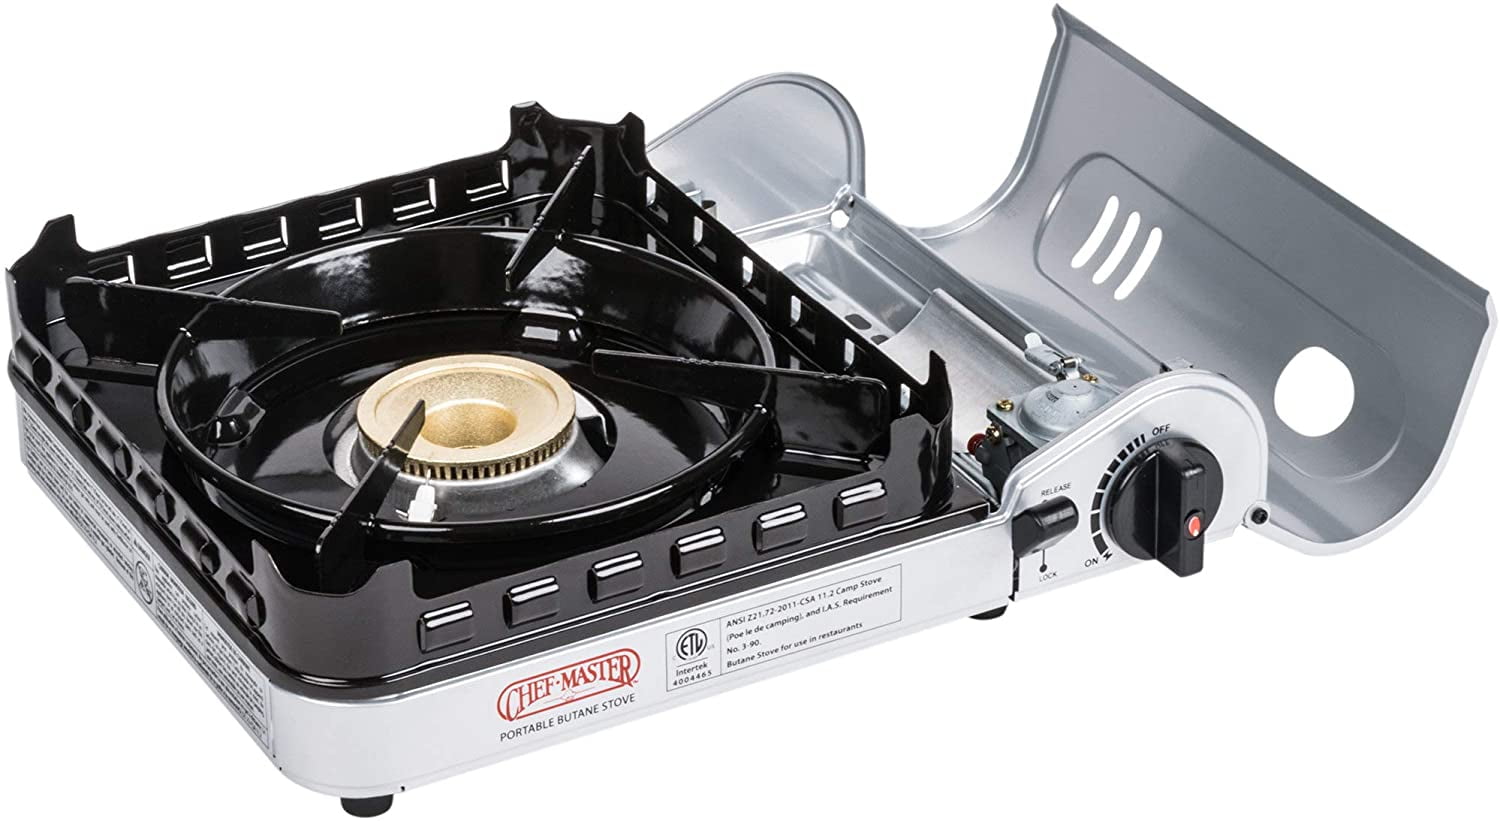  Chef Master 90019 Portable Butane Stove, 15,000 BTU Single  Burner Gas Stove, Camping and Backpacking Essentials, Piezo Click  Ignition, Double Wind Guard Burner